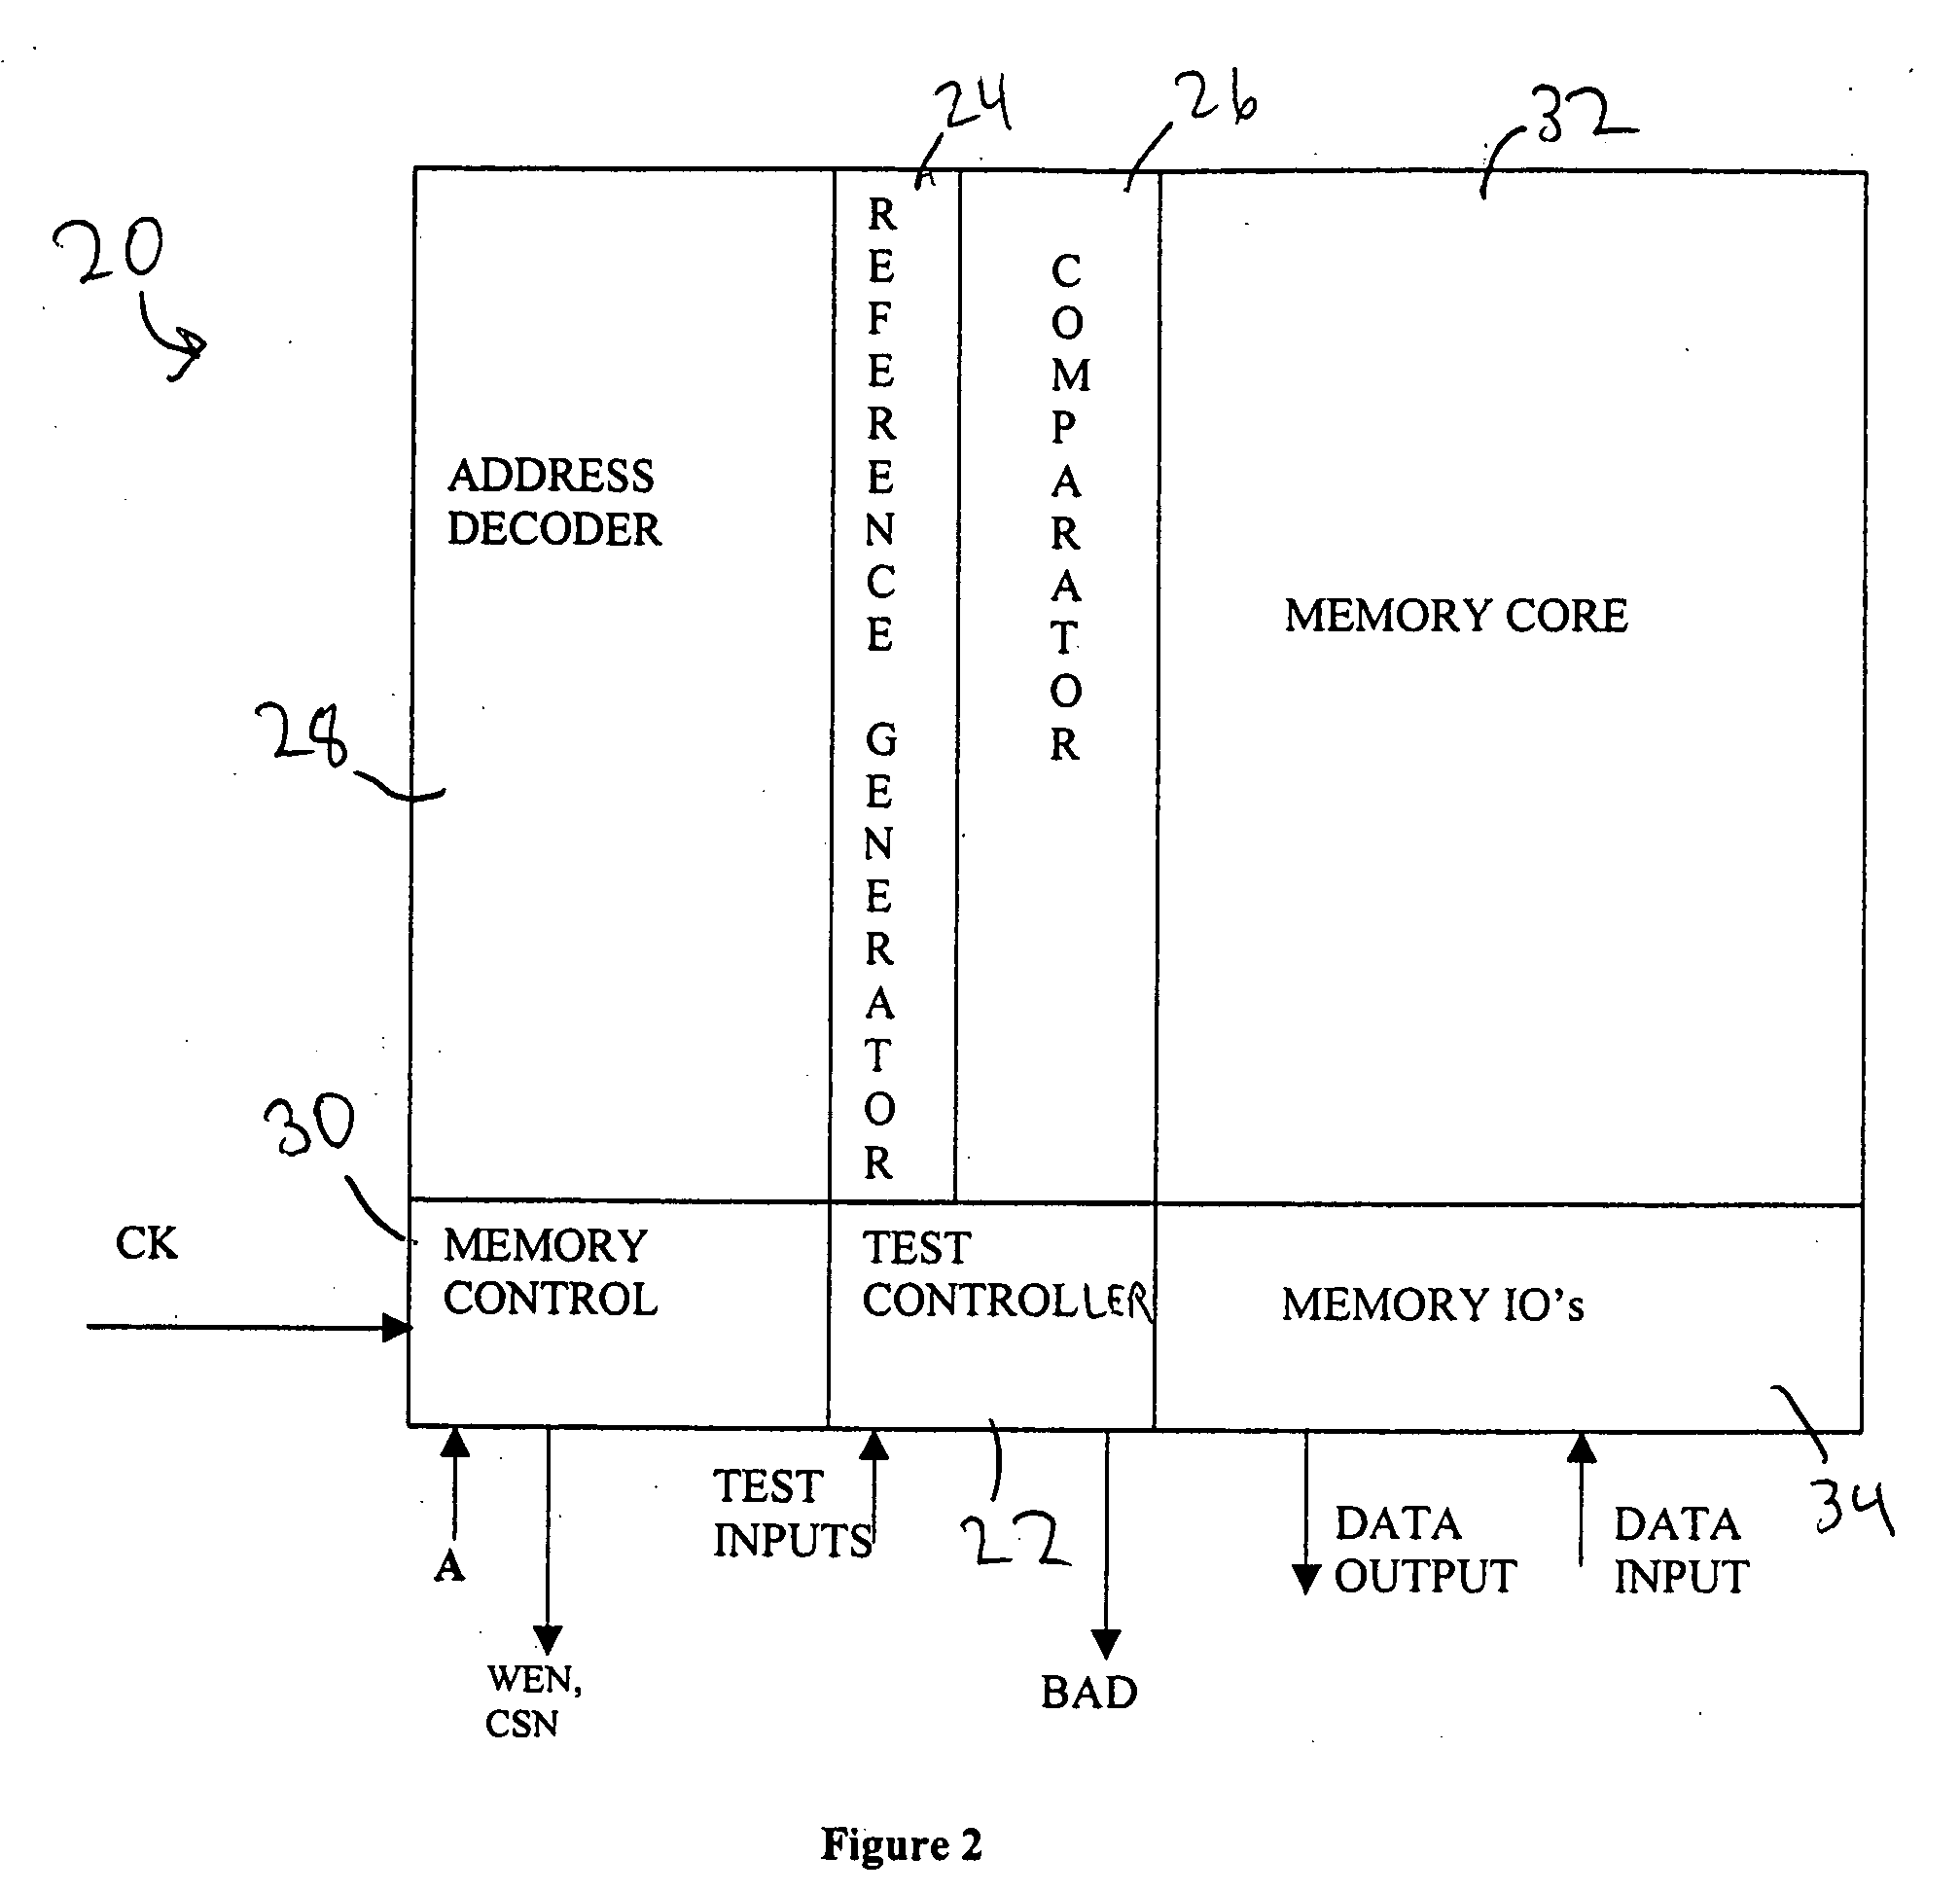 Area efficient memory architecture with decoder self test and debug capability